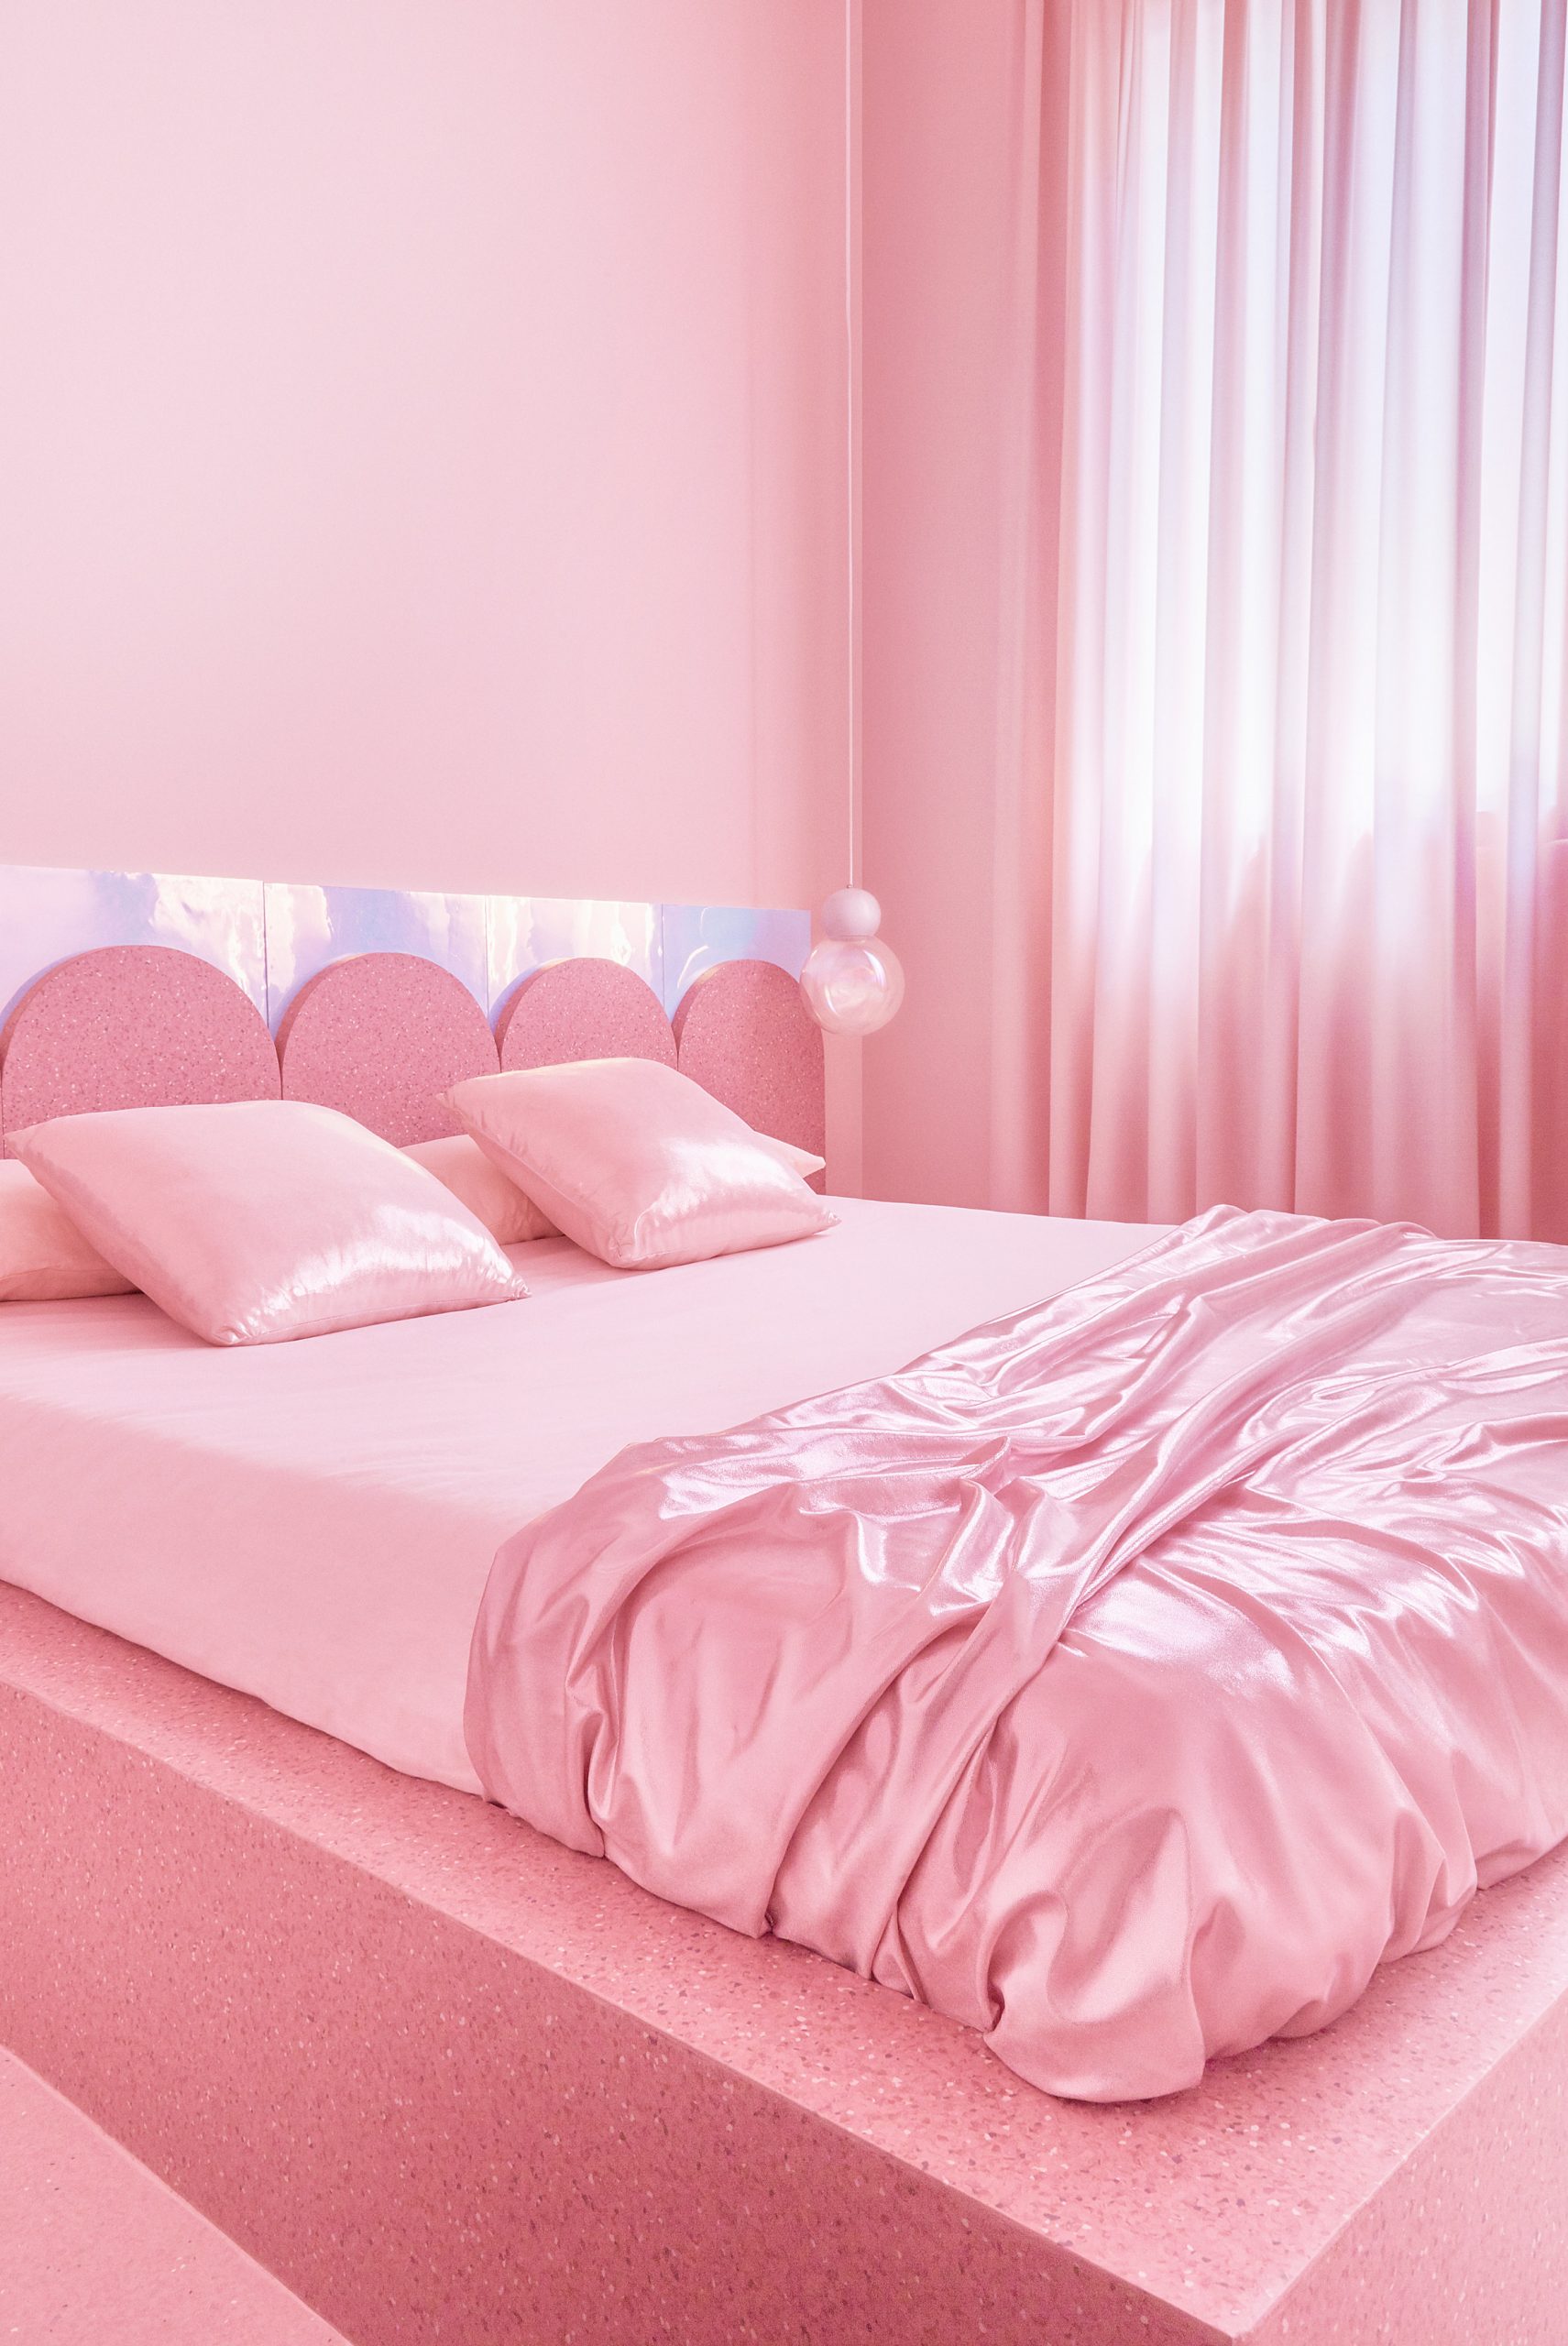 Bedrooms of Minimal Fantasy, a pink apartment in Madrid